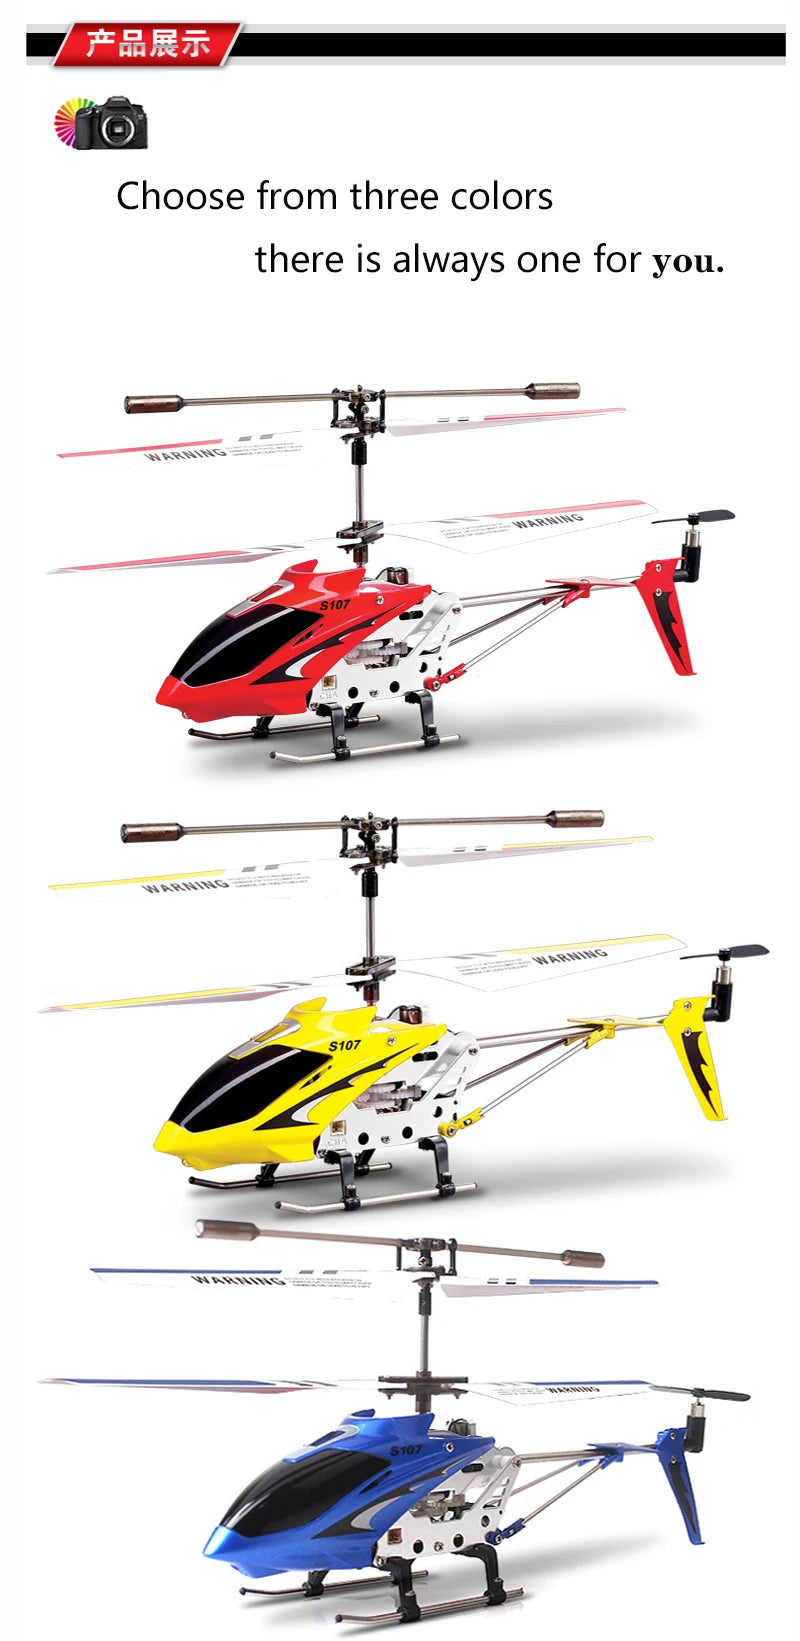 Syma S107G Rc Helicopter, FRRT Choose from three colors there is always one for you: 5107 5107 